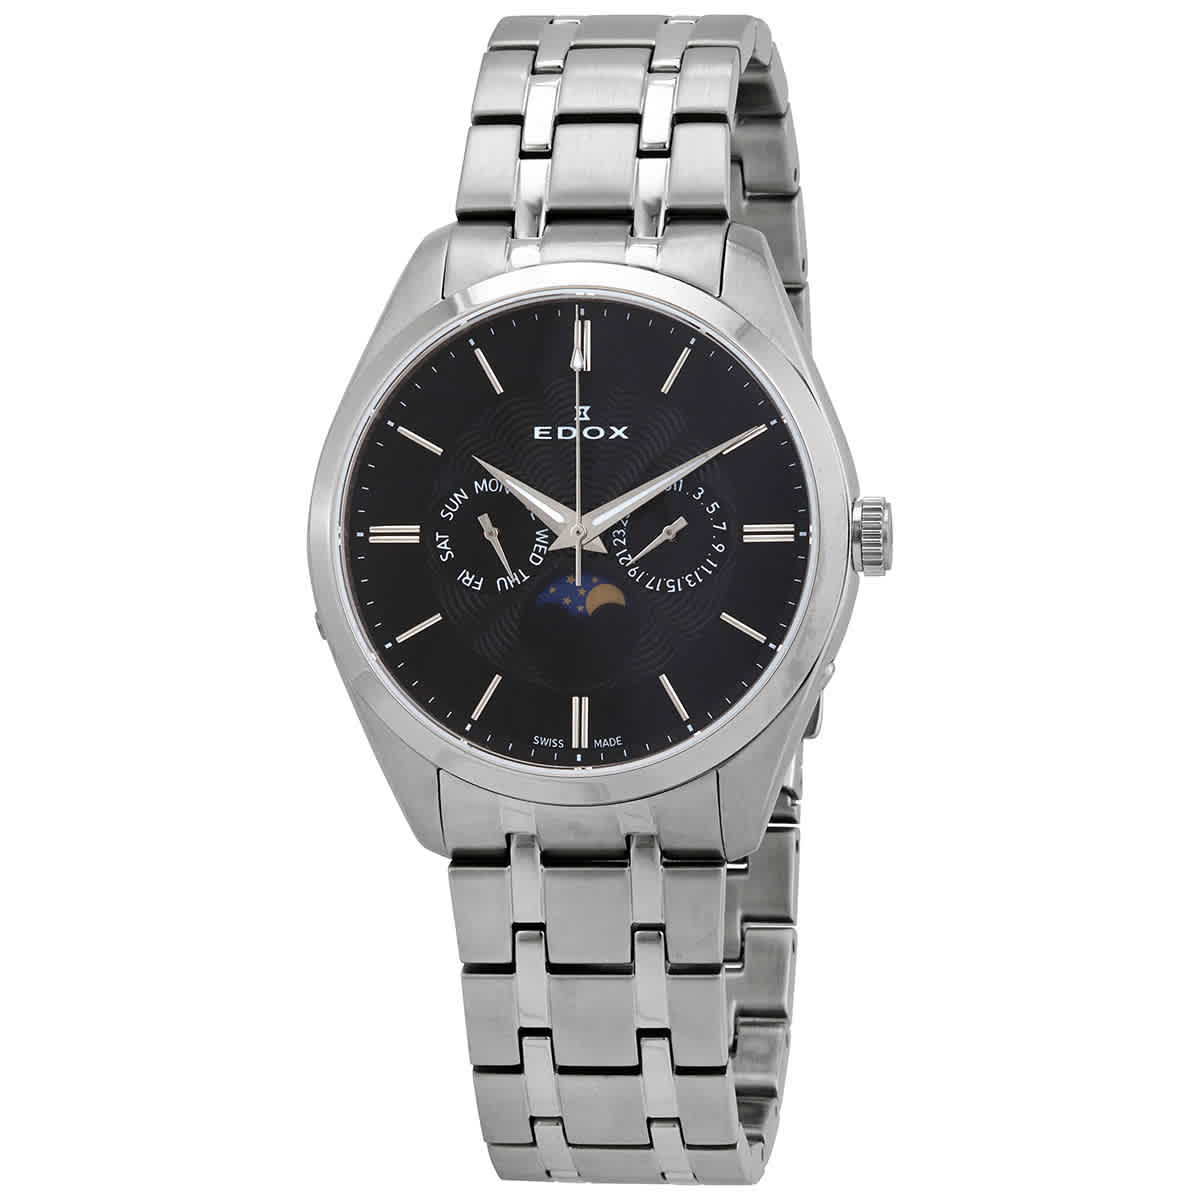 Edox Moonphase Date Black Dial Stainless Steel Mens Watch 40008-3m-nin In Black,silver Tone